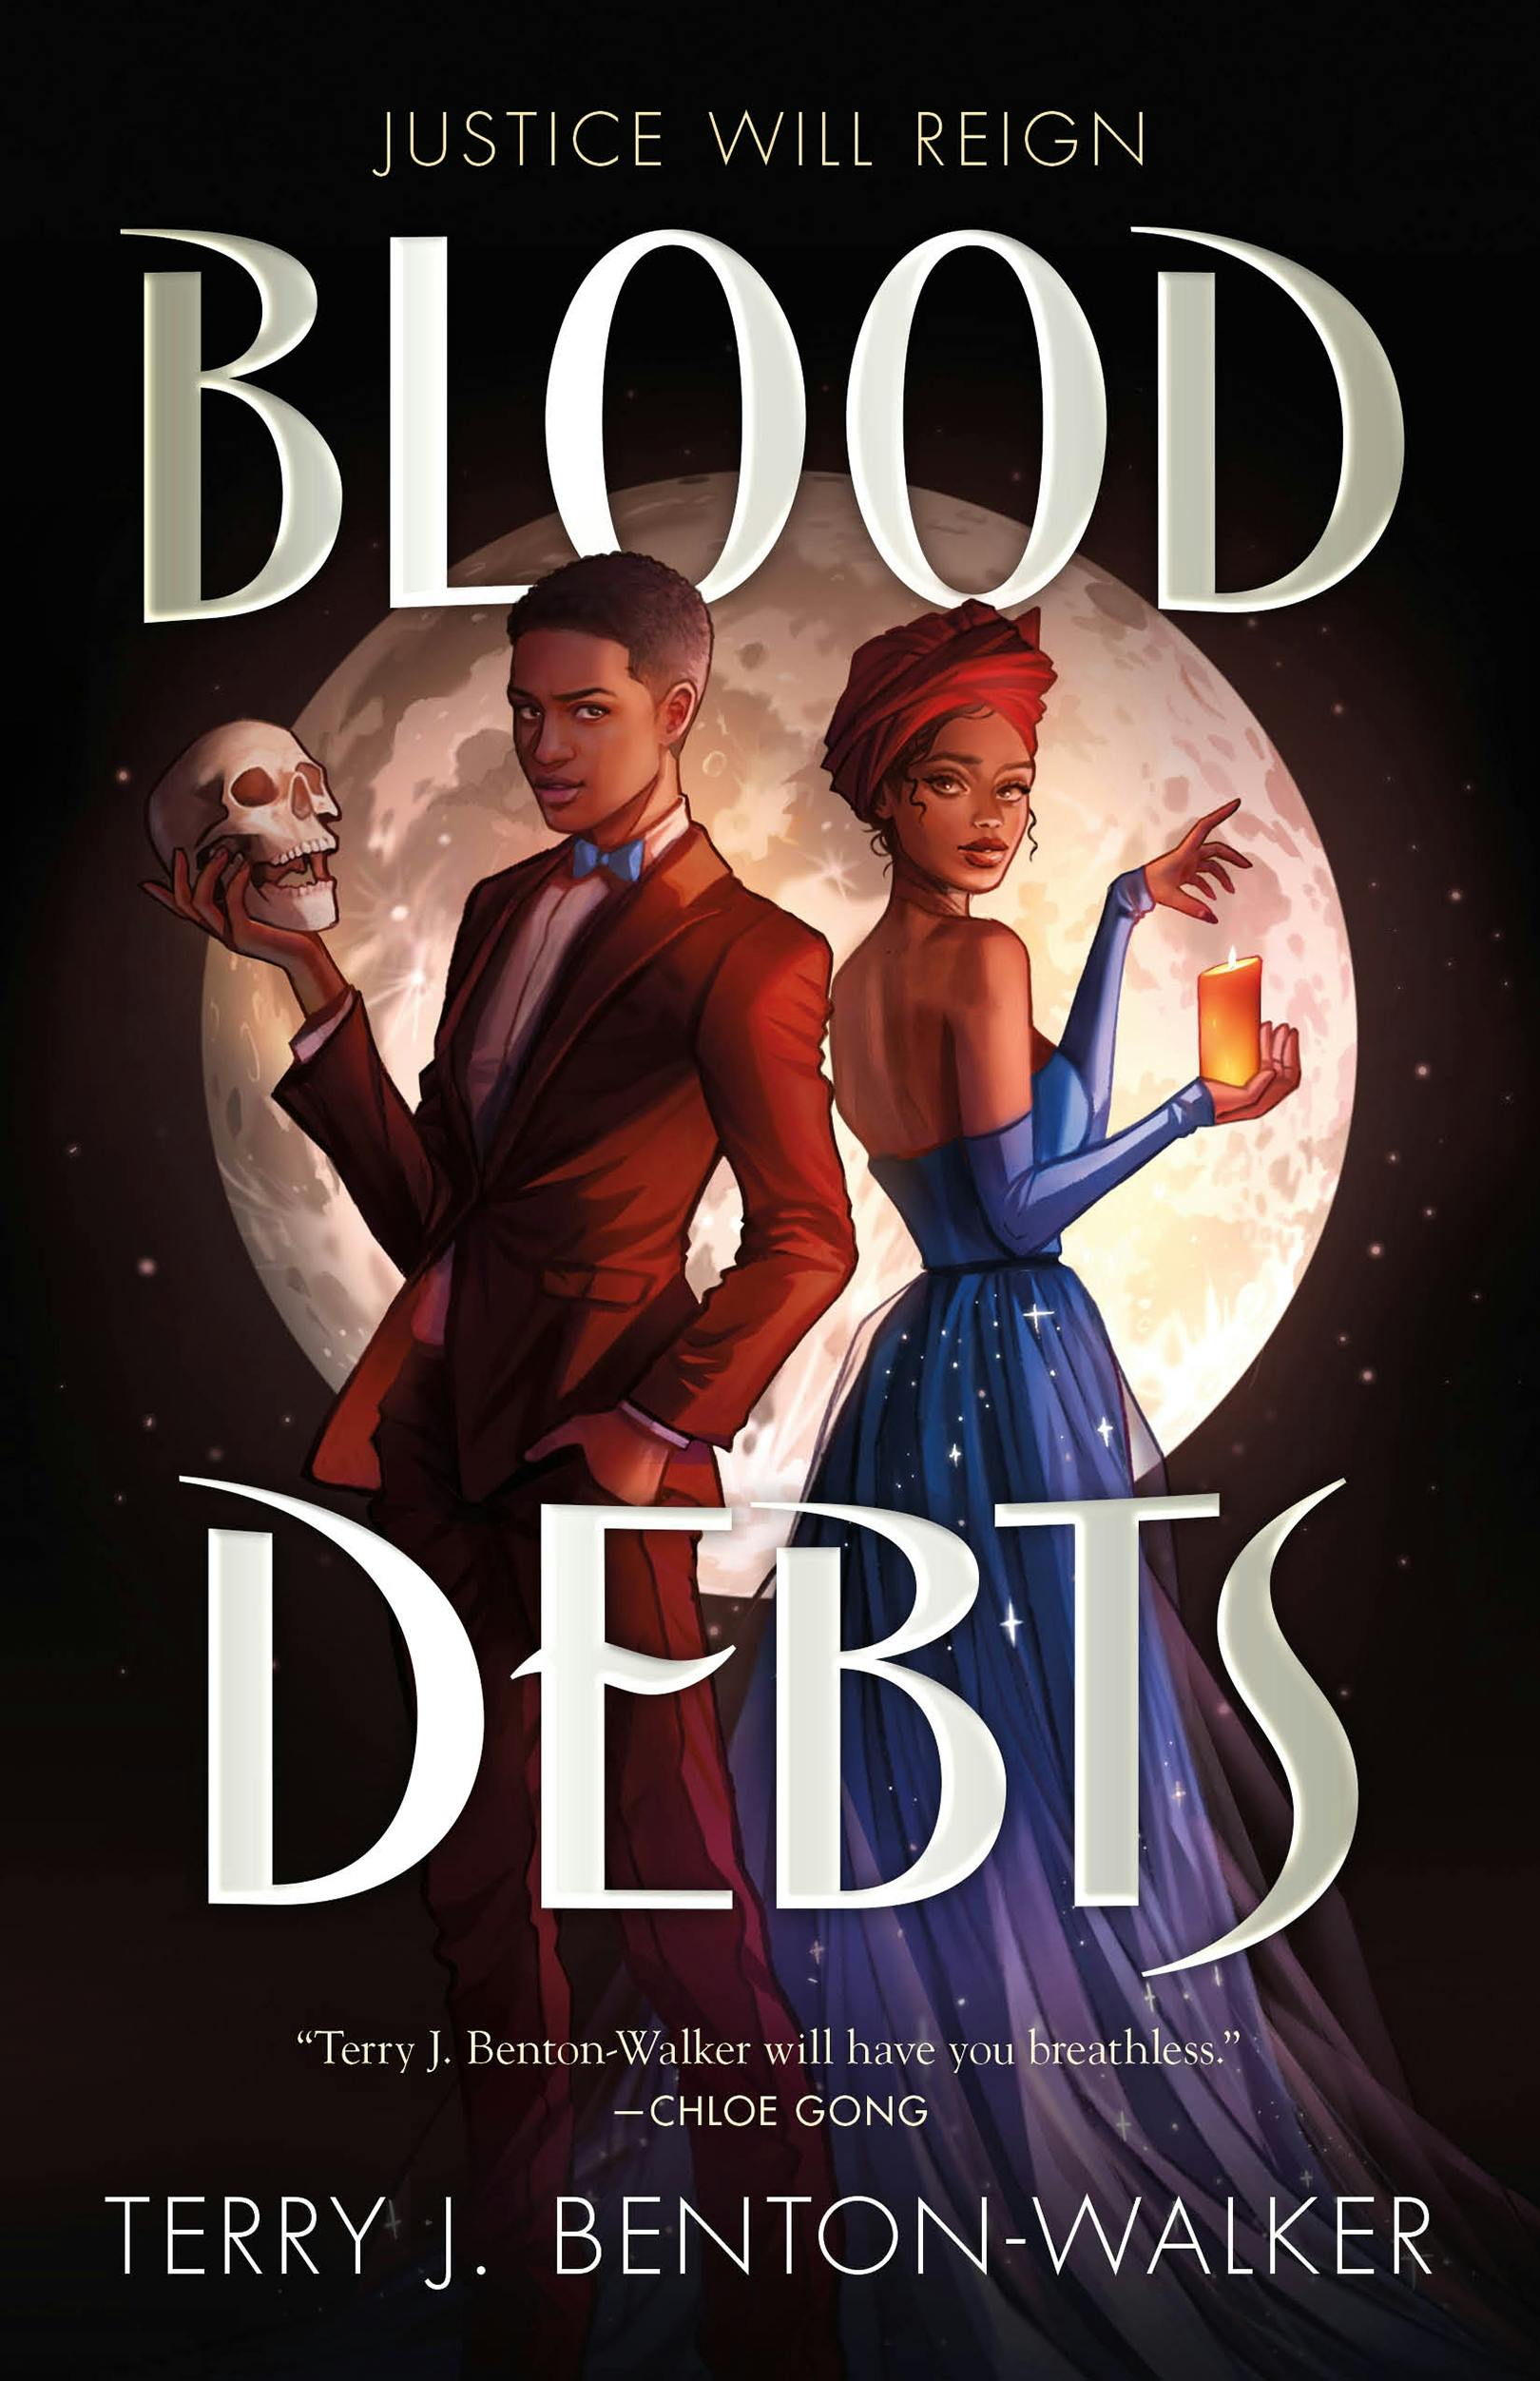 Cover for the book titled as: Blood Debts